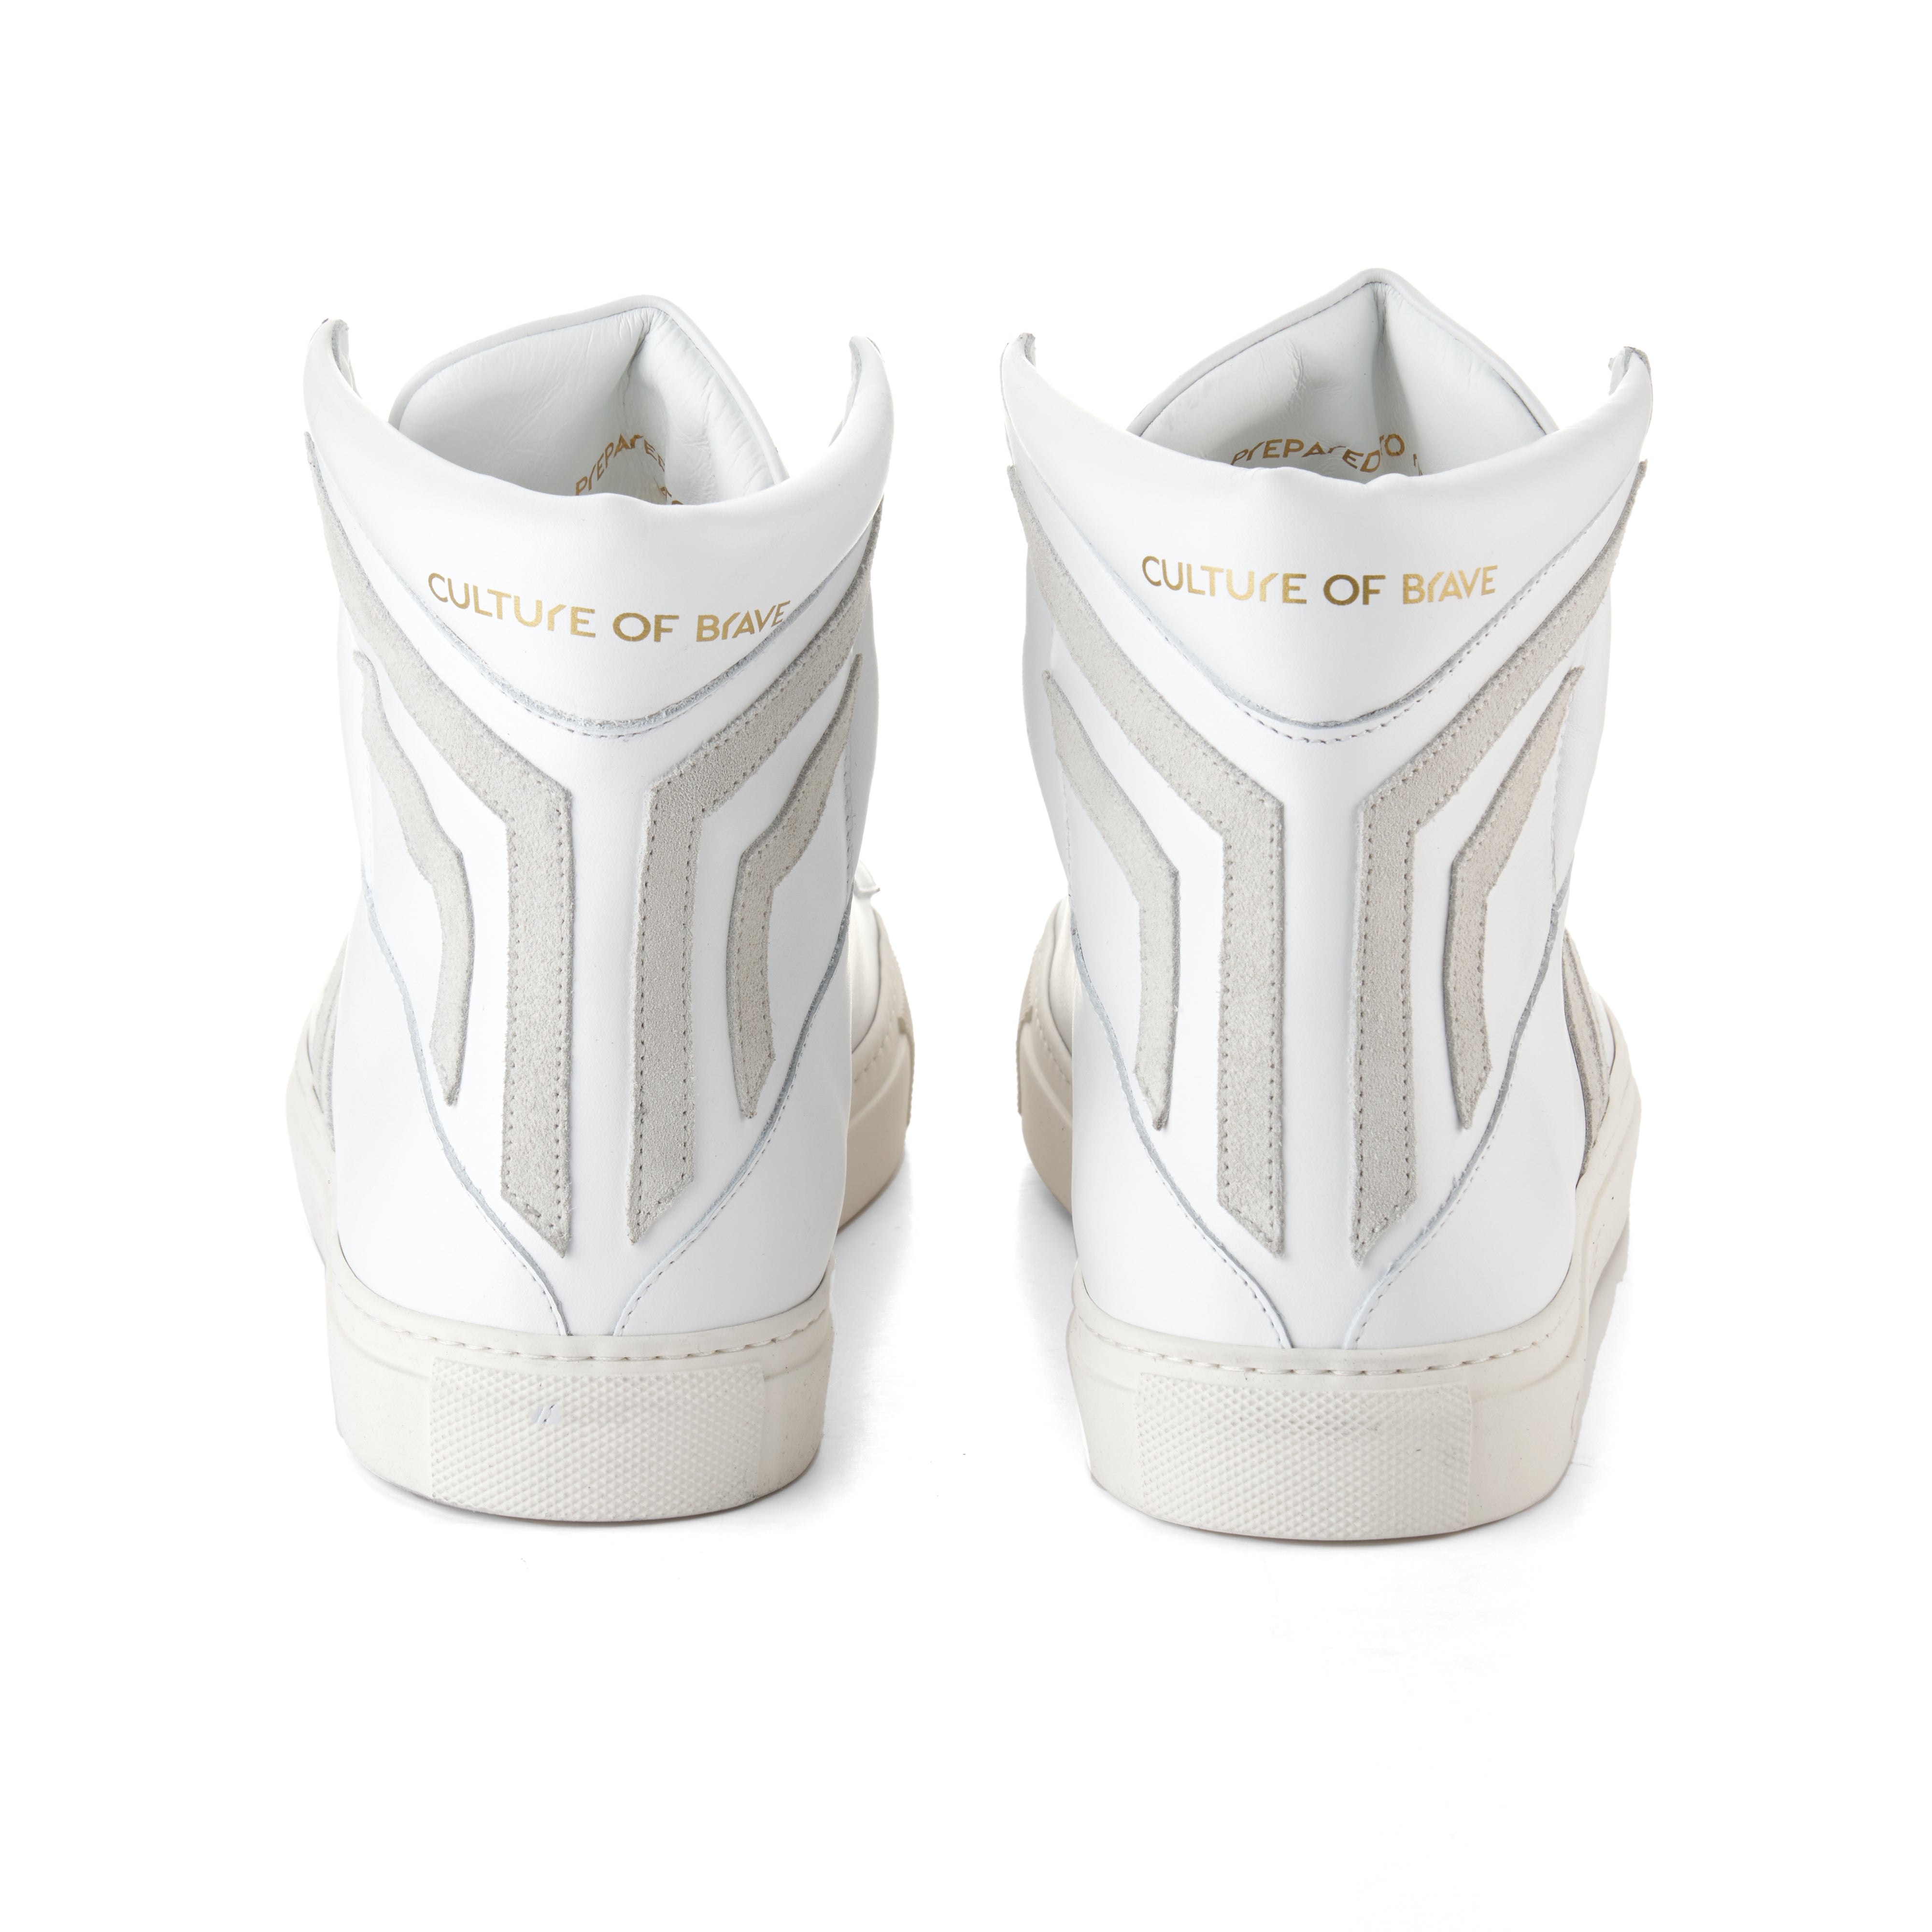 Prepared to Risk S21 Women White leather offwhite wing high cut